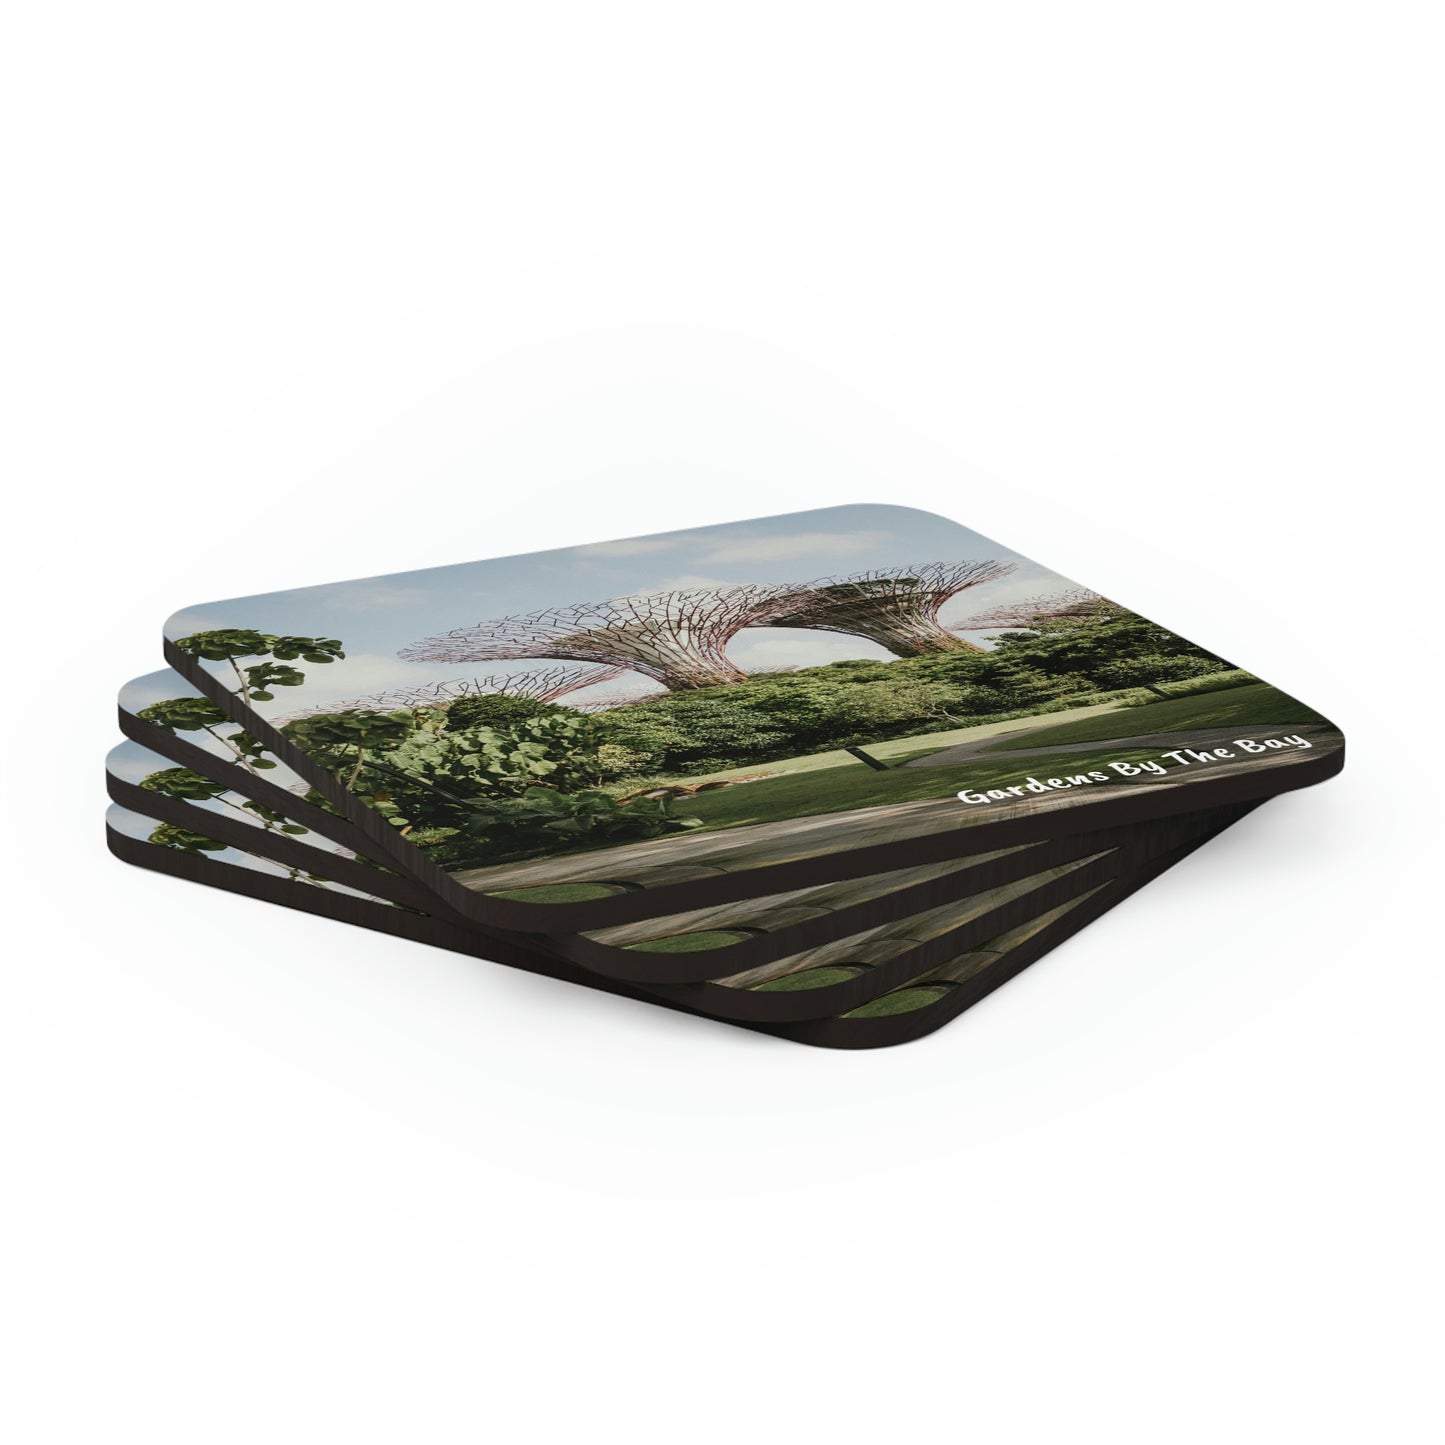 Corkwood Coaster Set (4) - SG Series (Gardens By The Bay)